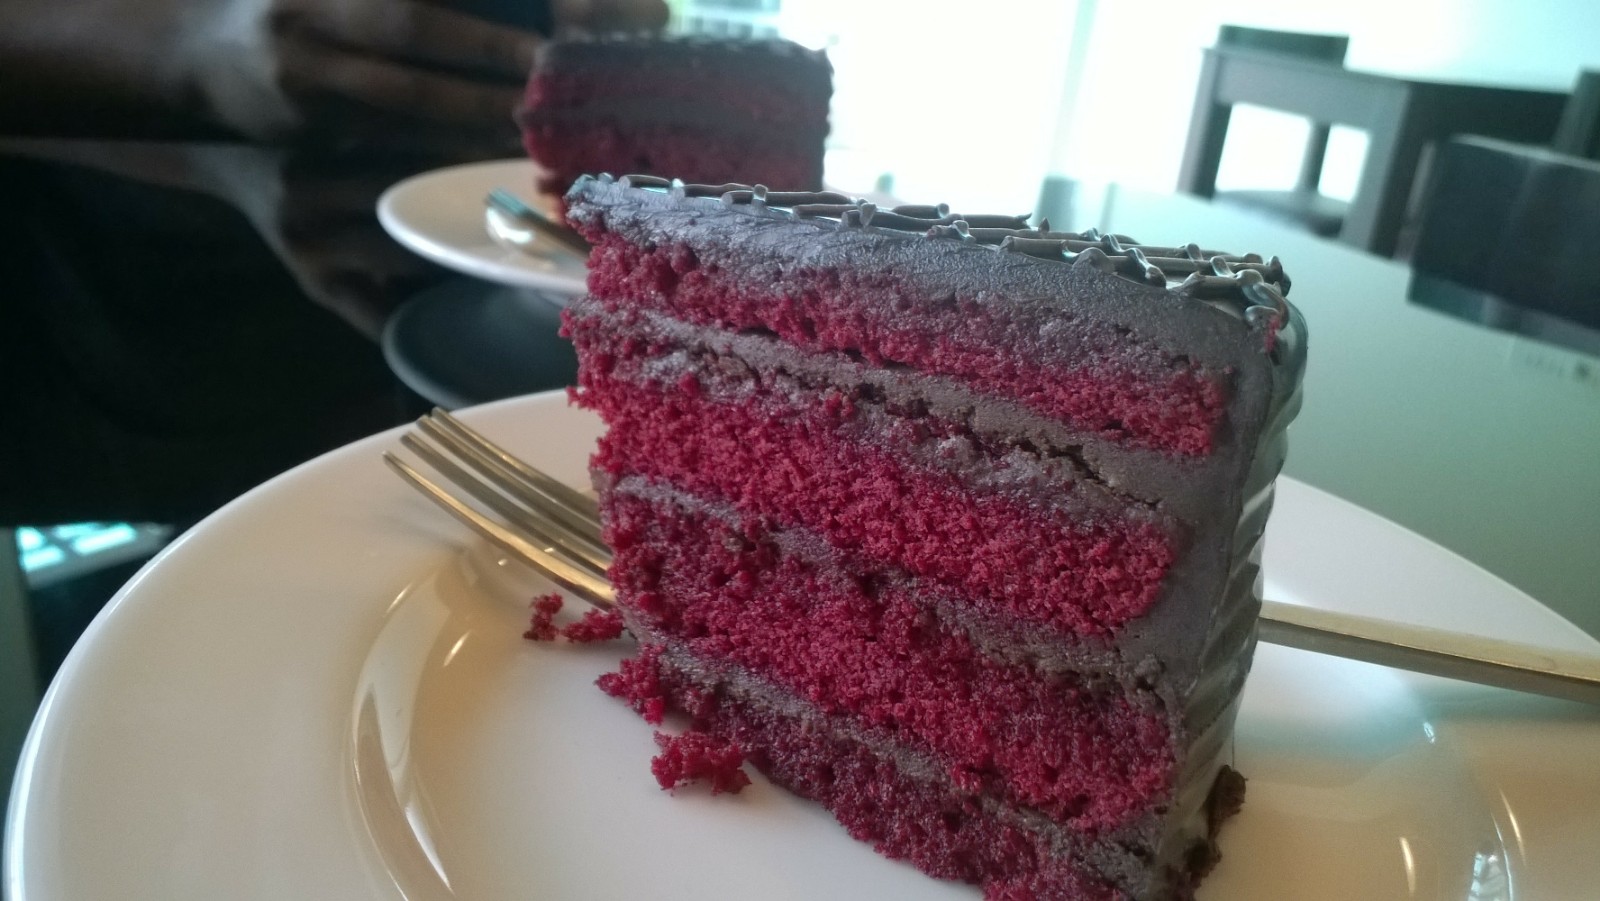 Red Velvet Cake with Chocolate Frosting